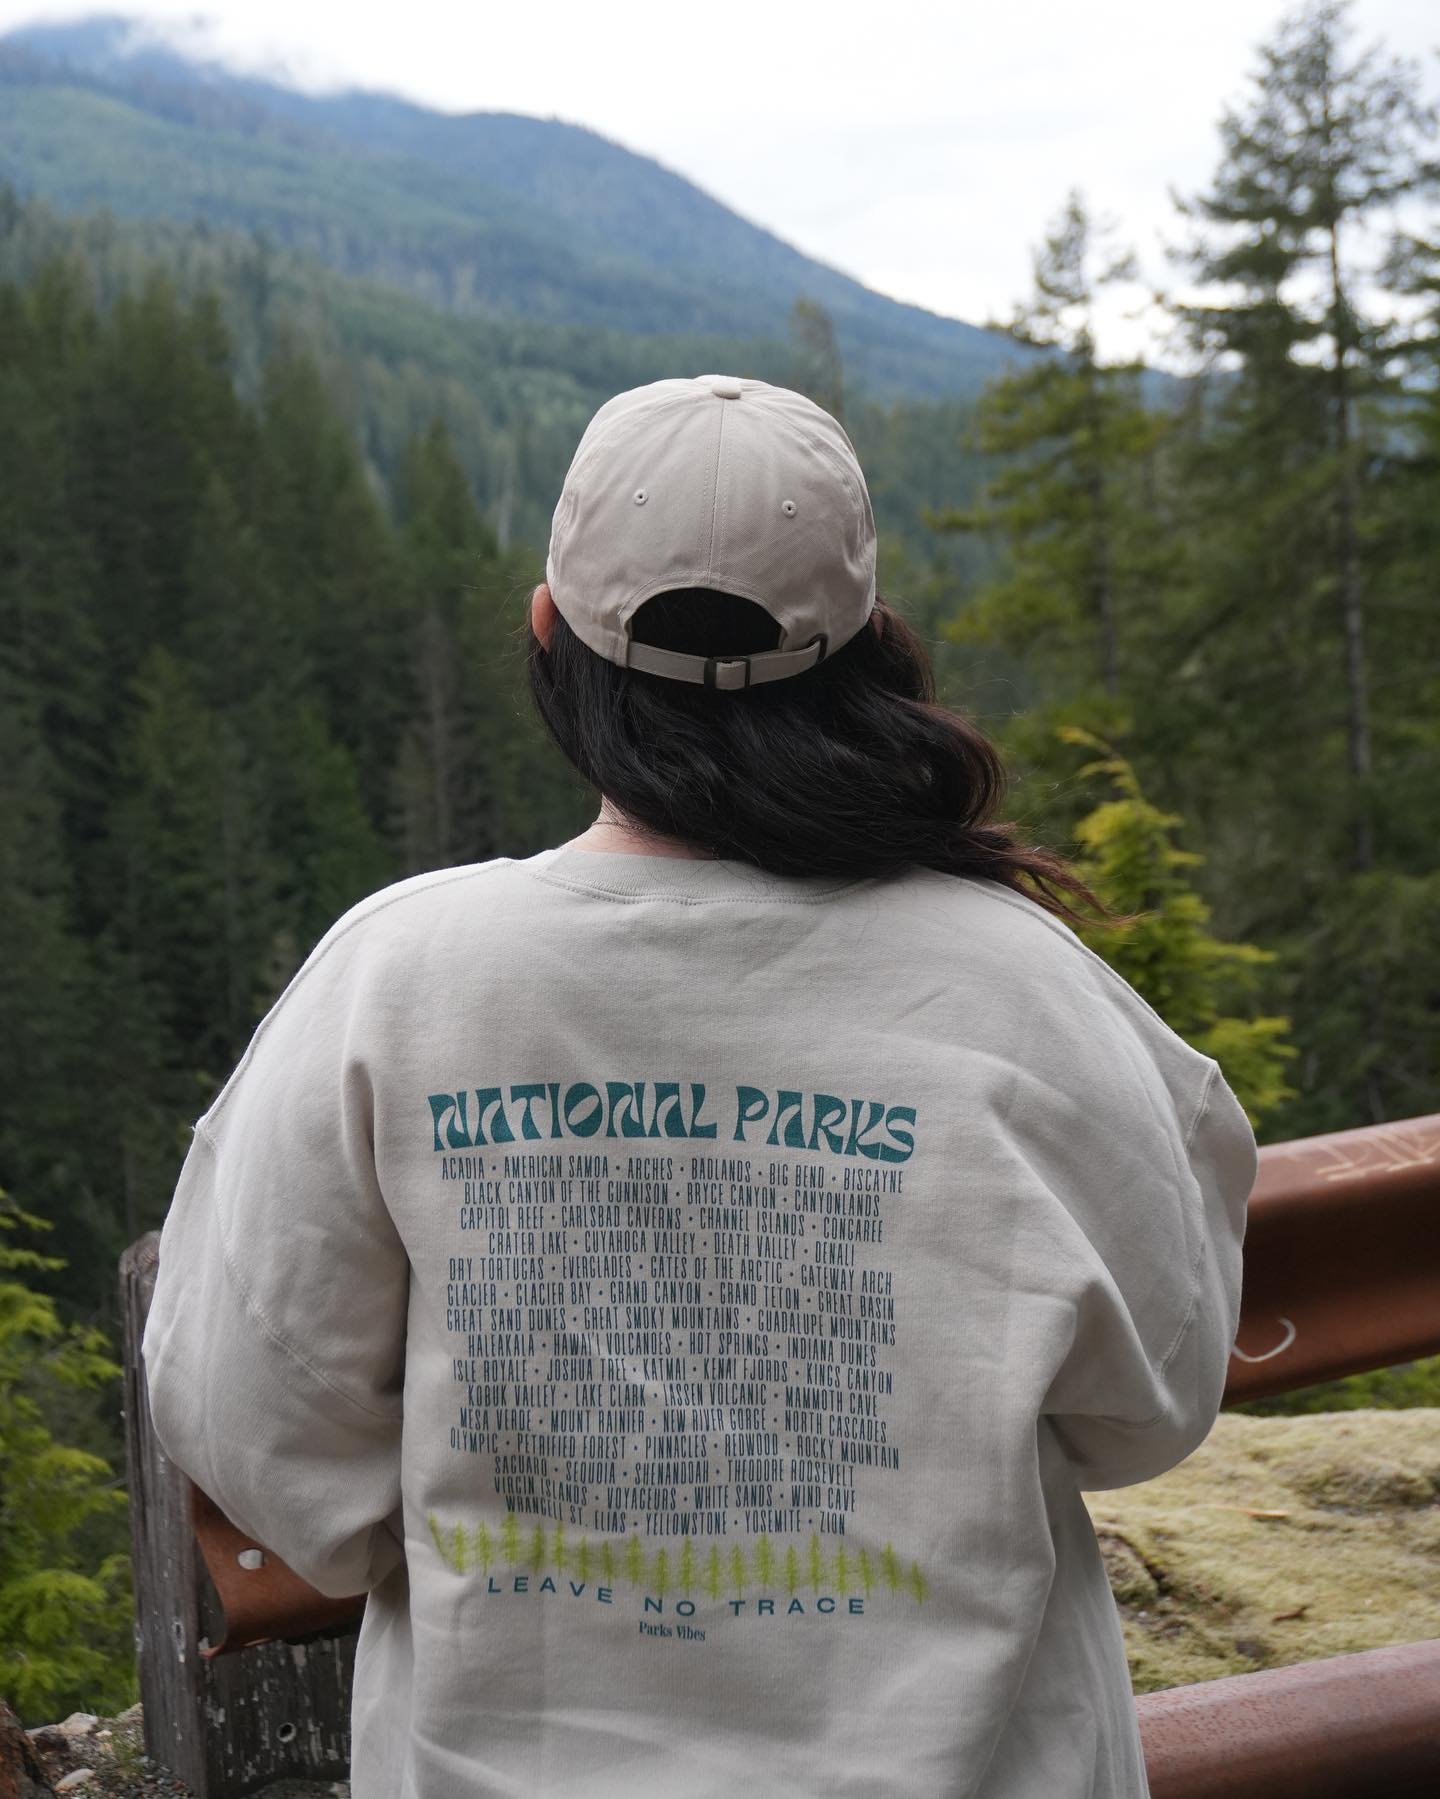 We&rsquo;re gearing up for summer in Washington but when it&rsquo;s still chilly outside, our go-to is the National Parks Nature Tour crewneck!